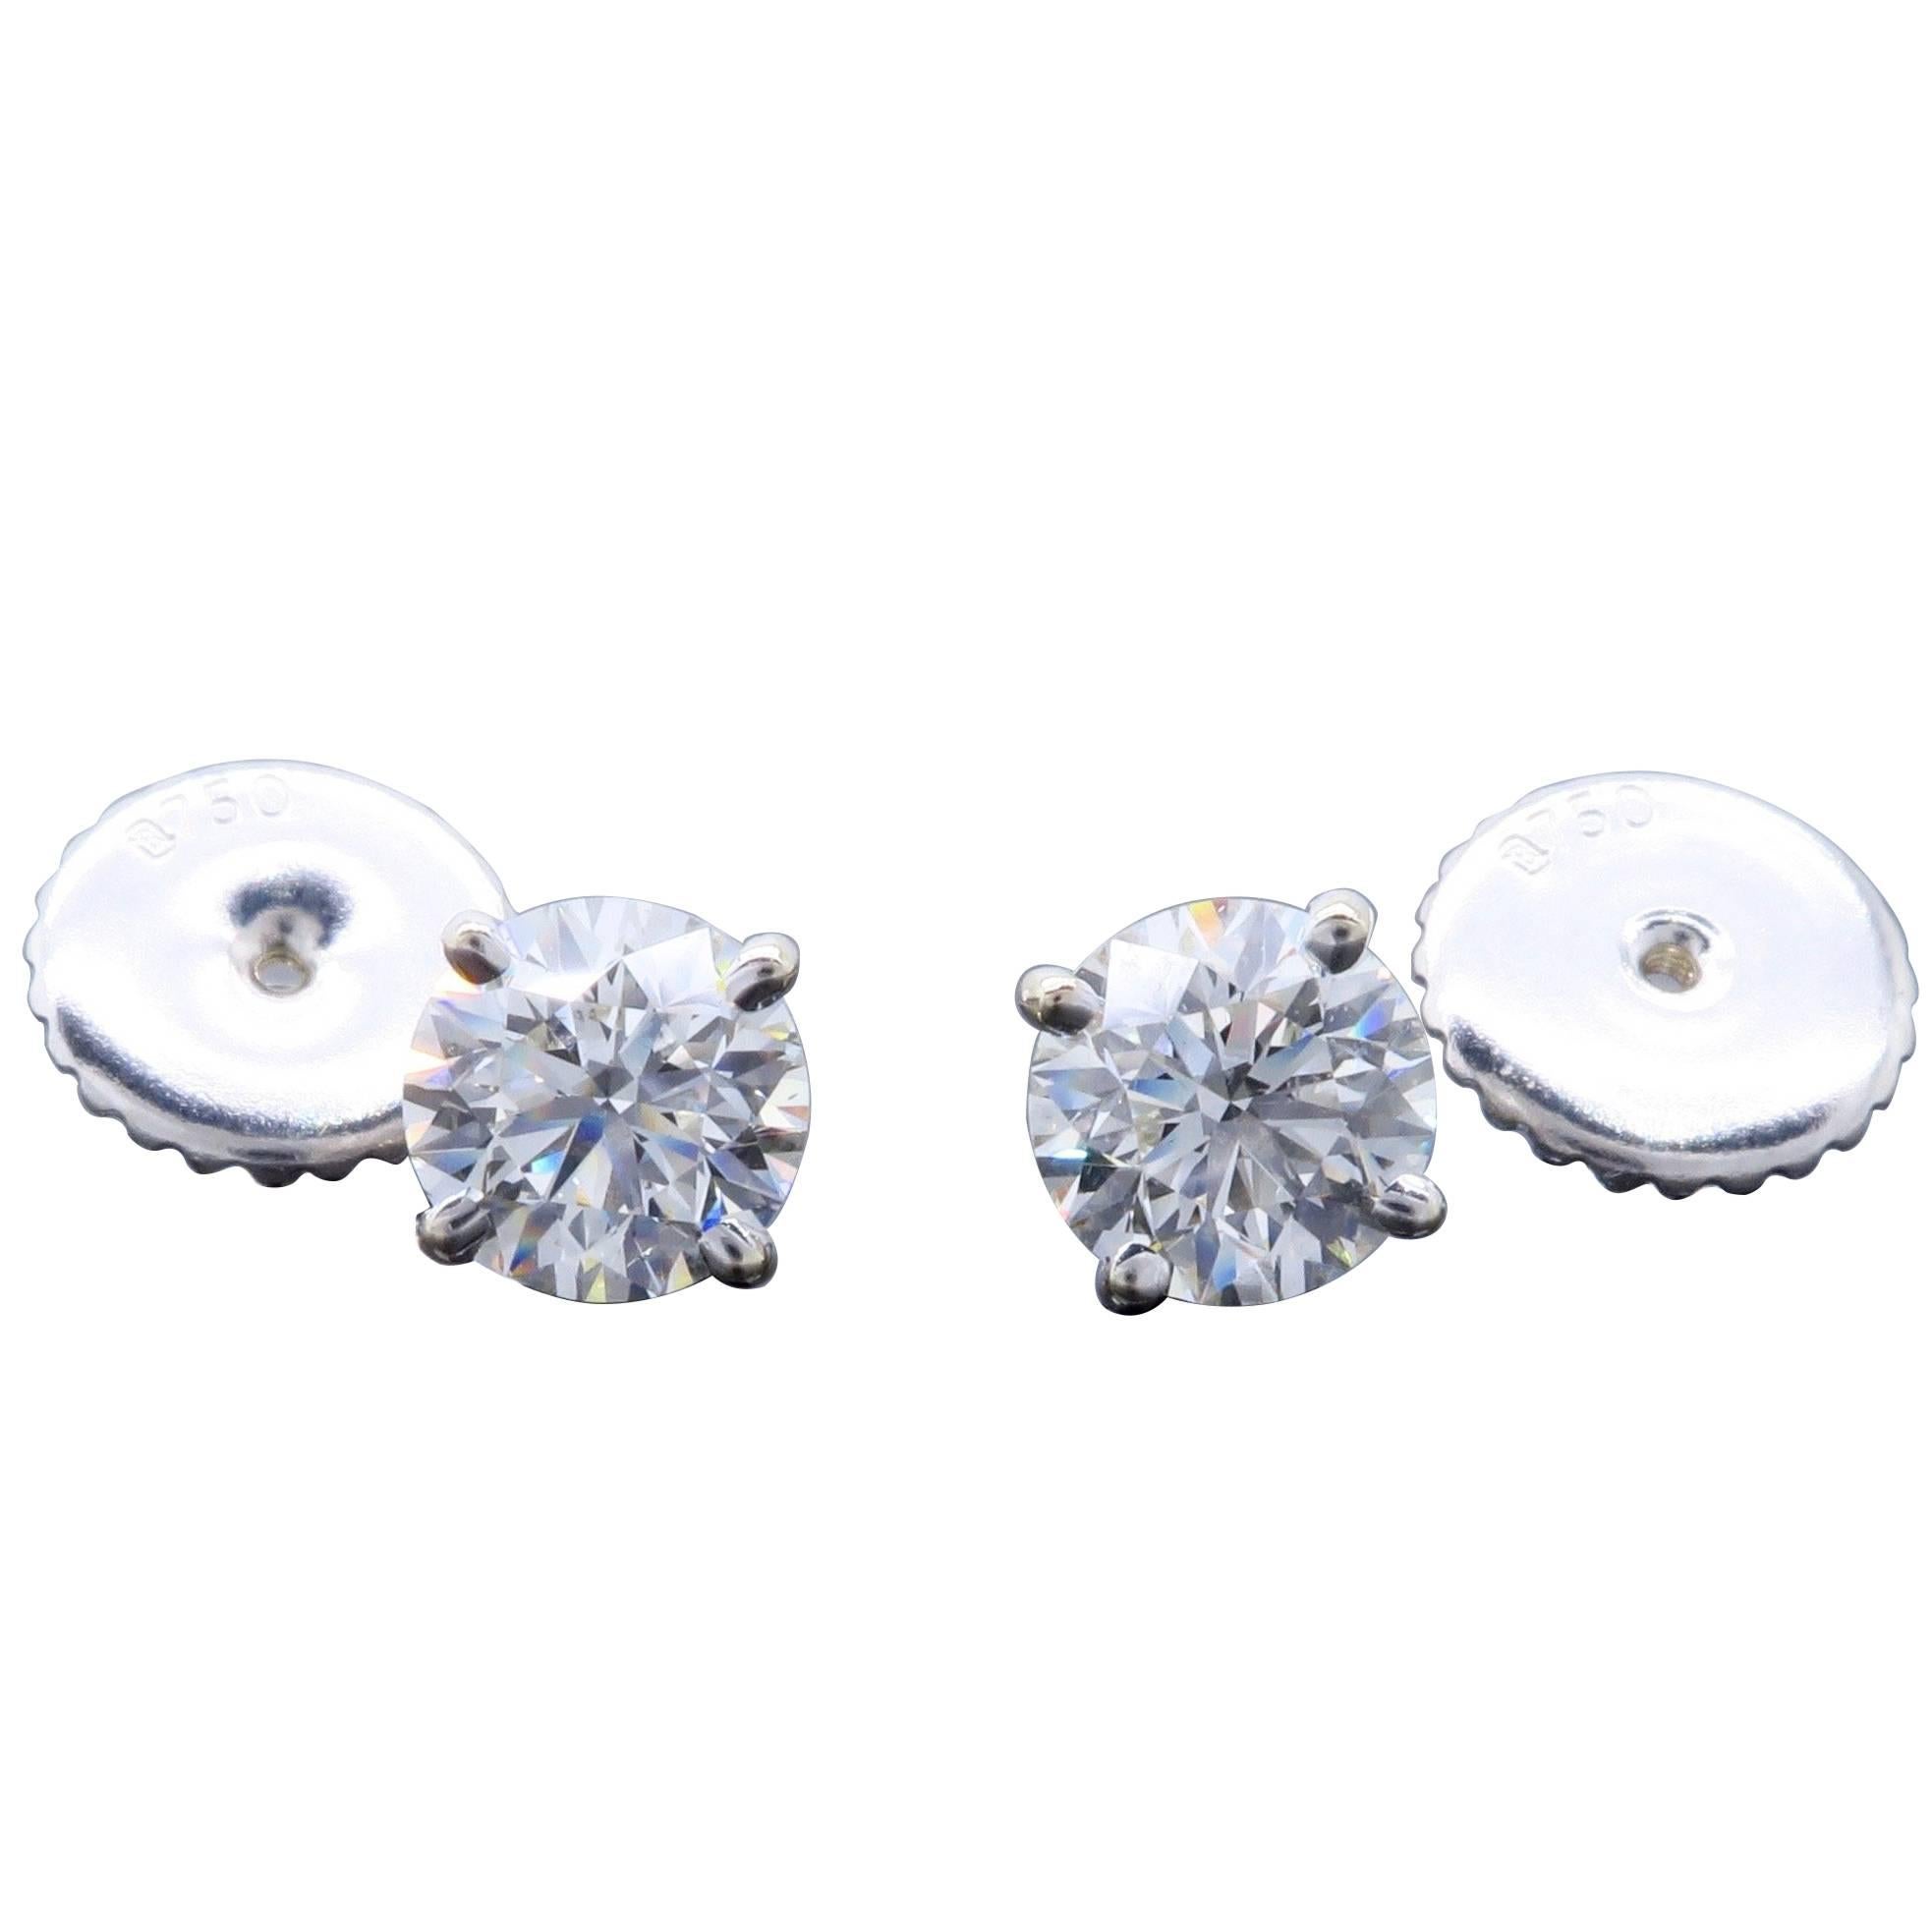 Pair of diamond studs featuring two GIA Certified Round Brilliant Cut Diamonds. Both diamonds are laser scribed with their GIA Certification numbers, GIA # 2106707491 is 1.00CT and has I color and SI2 clarity while GIA # 2106555655 is 1.01CT and has